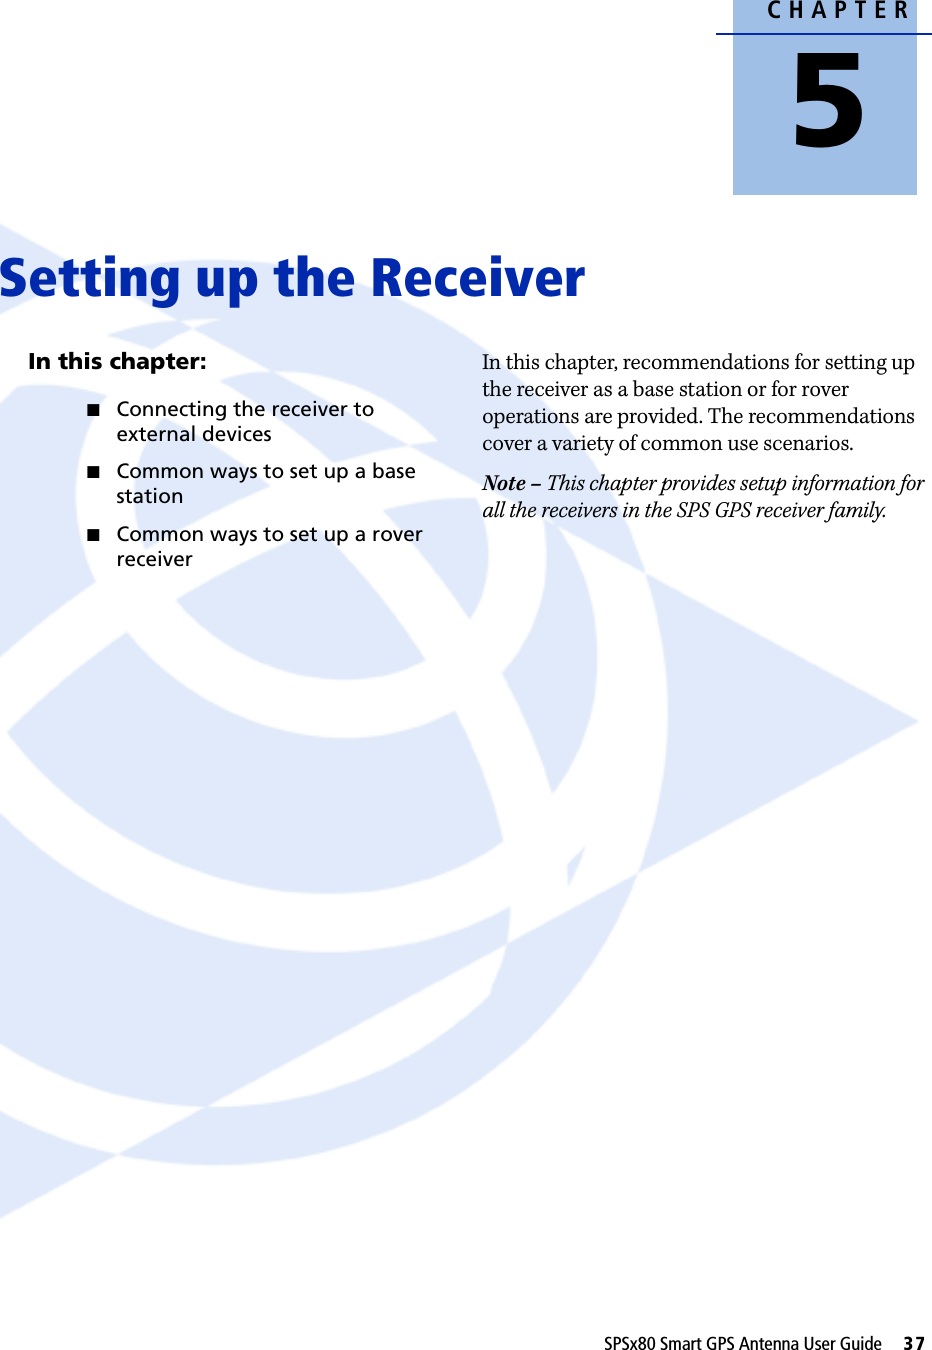 CHAPTER5SPSx80 Smart GPS Antenna User Guide     37Setting up the Receiver 5In this chapter:QConnecting the receiver to external devicesQCommon ways to set up a base stationQCommon ways to set up a rover receiverIn this chapter, recommendations for setting up the receiver as a base station or for rover operations are provided. The recommendations cover a variety of common use scenarios. Note – This chapter provides setup information for all the receivers in the SPS GPS receiver family.